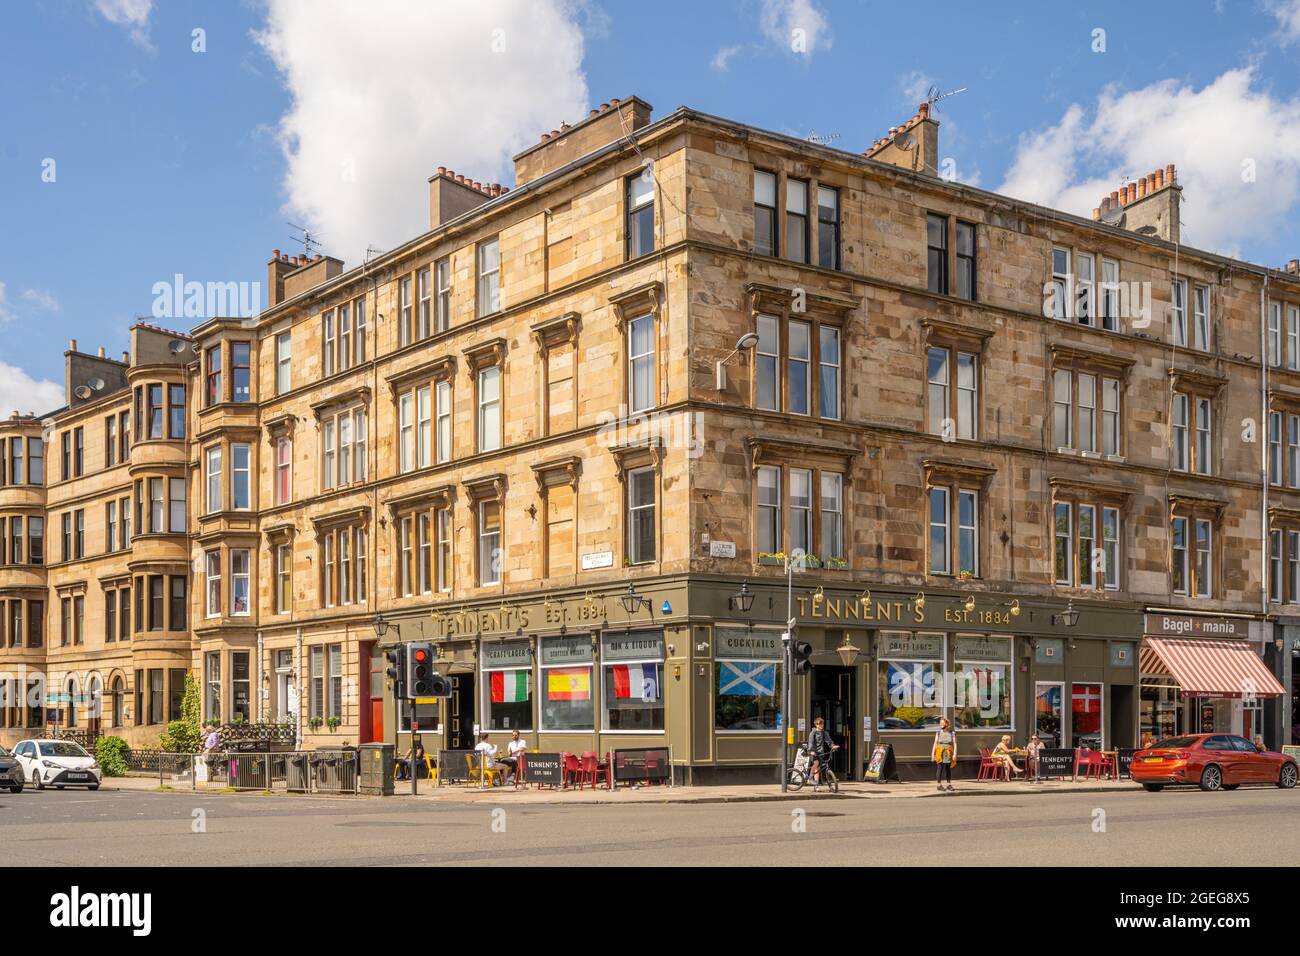 Typical Glasgow tenement building on Byers road Glasgow Stock Photo